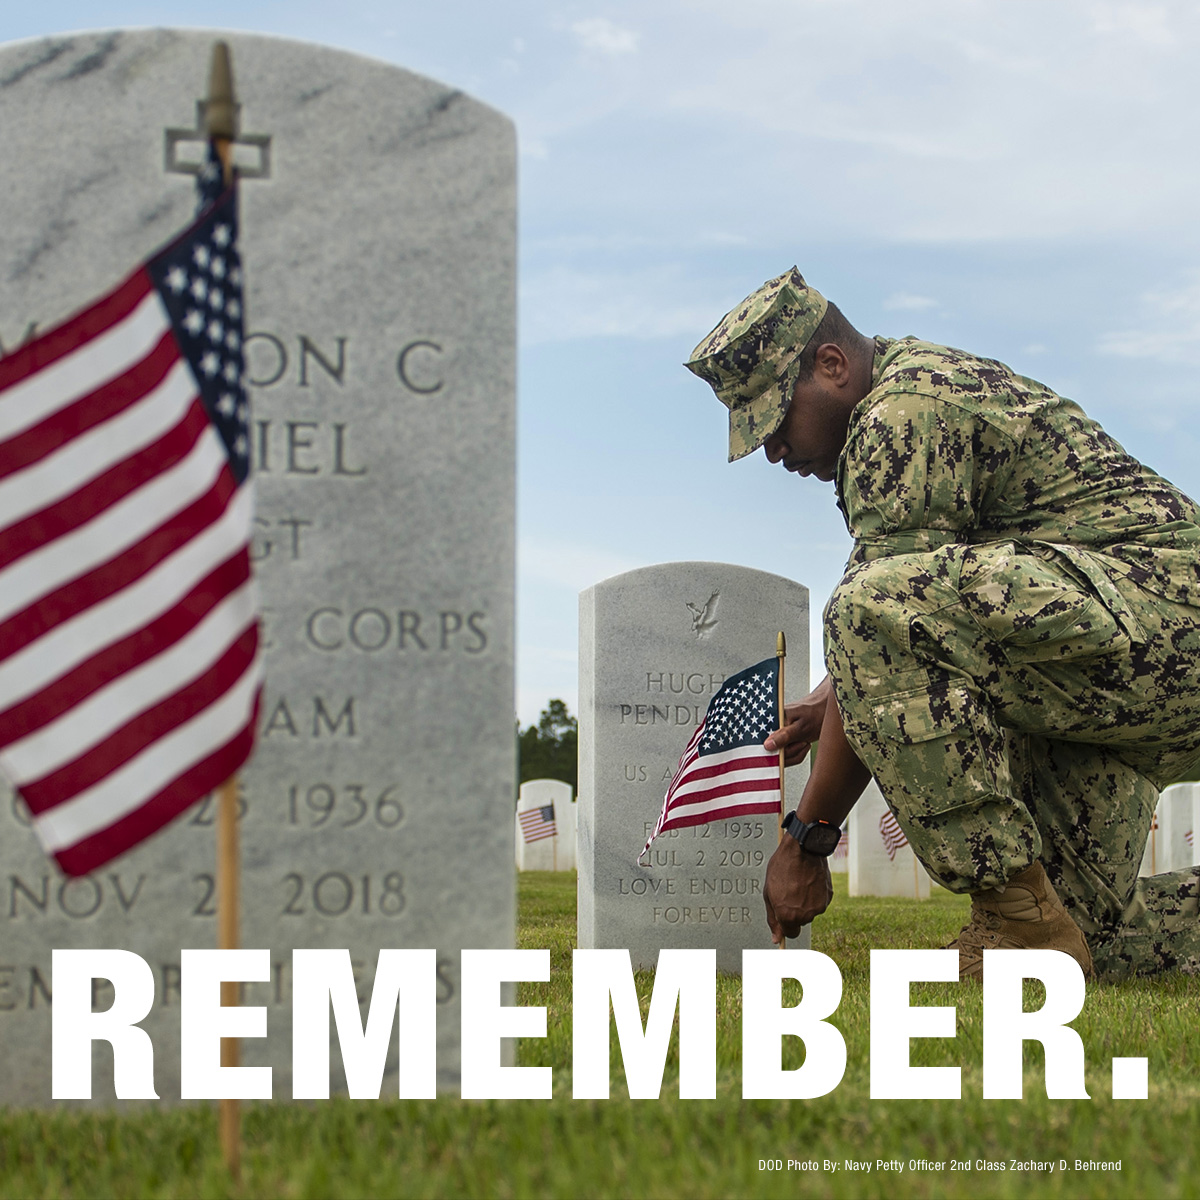 In their ultimate sacrifice, they gifted us the freedoms we enjoy today. This long weekend, we honor their courage, legacy, and service to our nation. #MemorialDay #RedWhiteAndBlue #HonorAndRemember